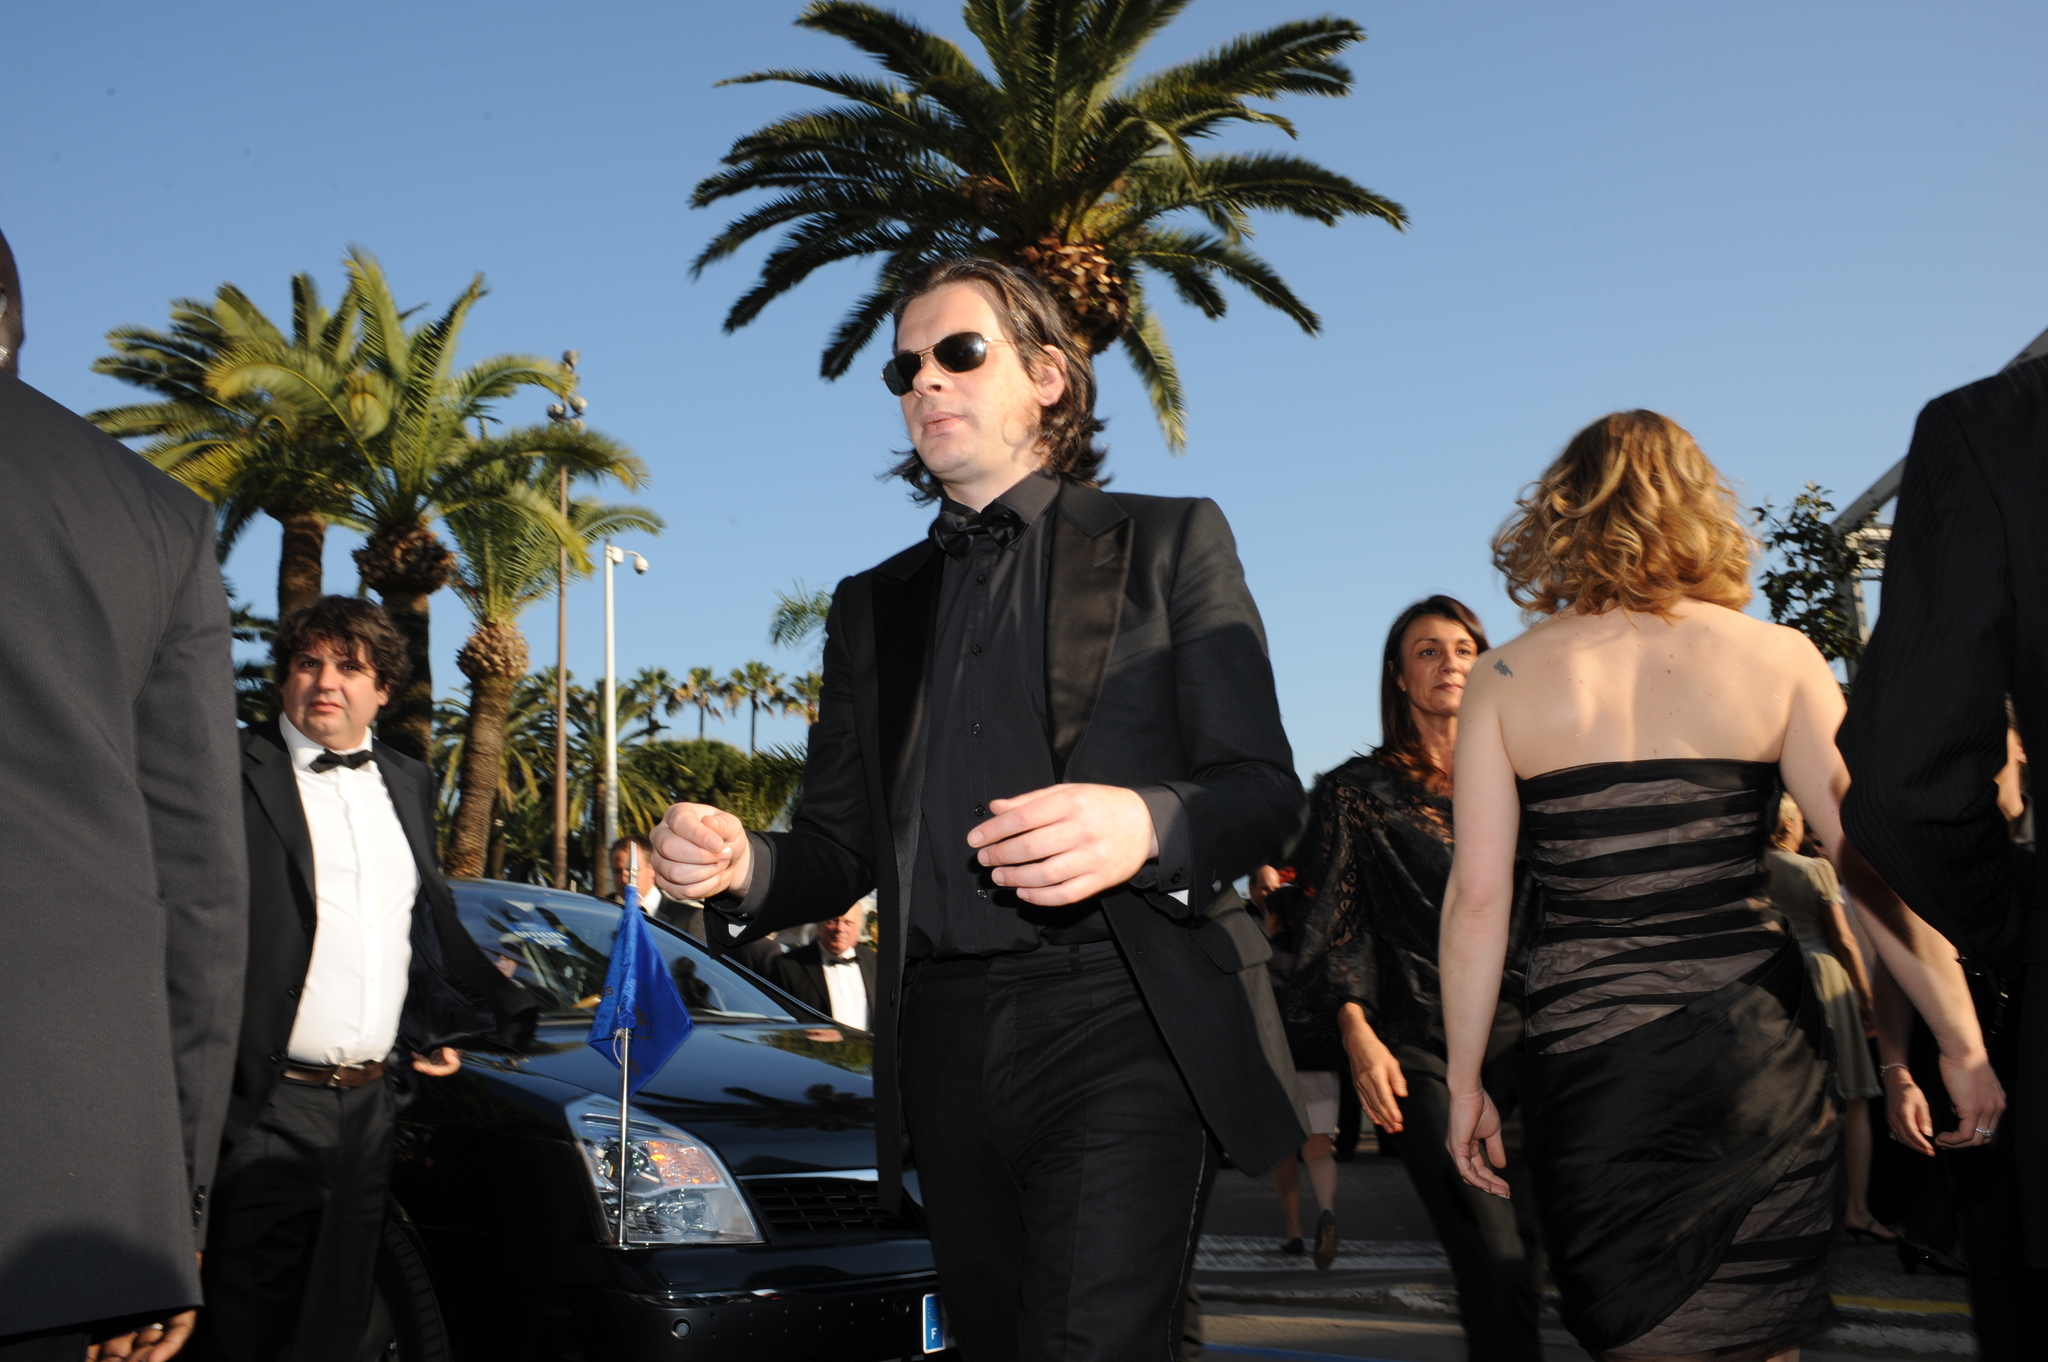 CANNES, FRANCE - MAY 17: 'Biutiful' Premiere at the Palais des Festivals during the 63rd Annual Cannes Film Festival